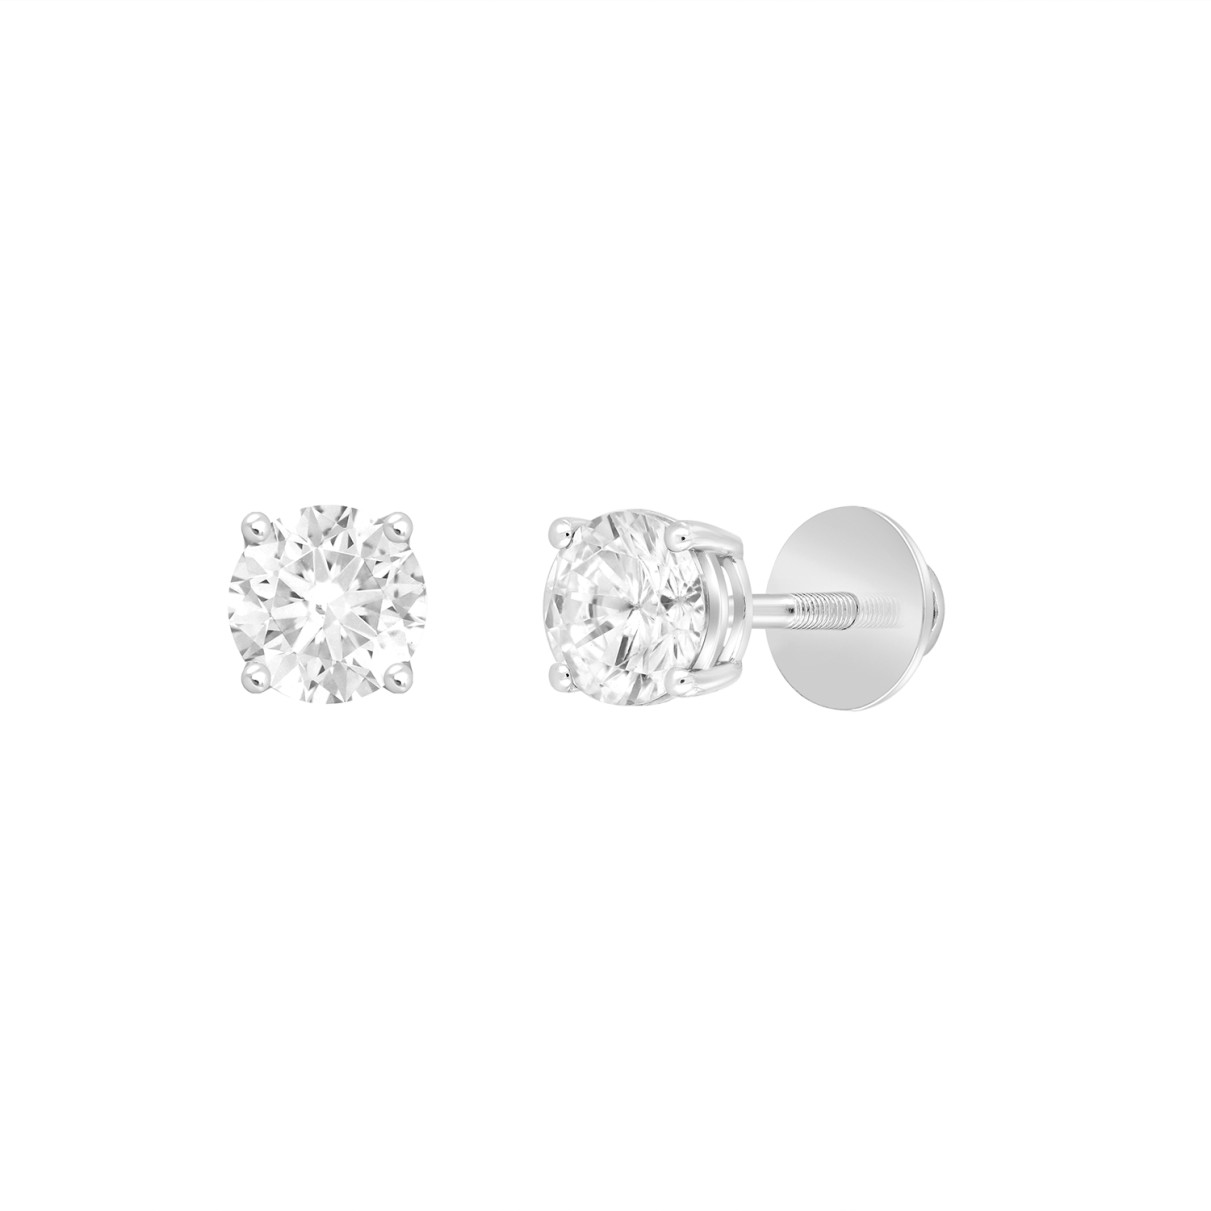 LADIES SOLITAIRE EARRINGS 2CT ROUND DIAMOND 14K WHITE GOLD